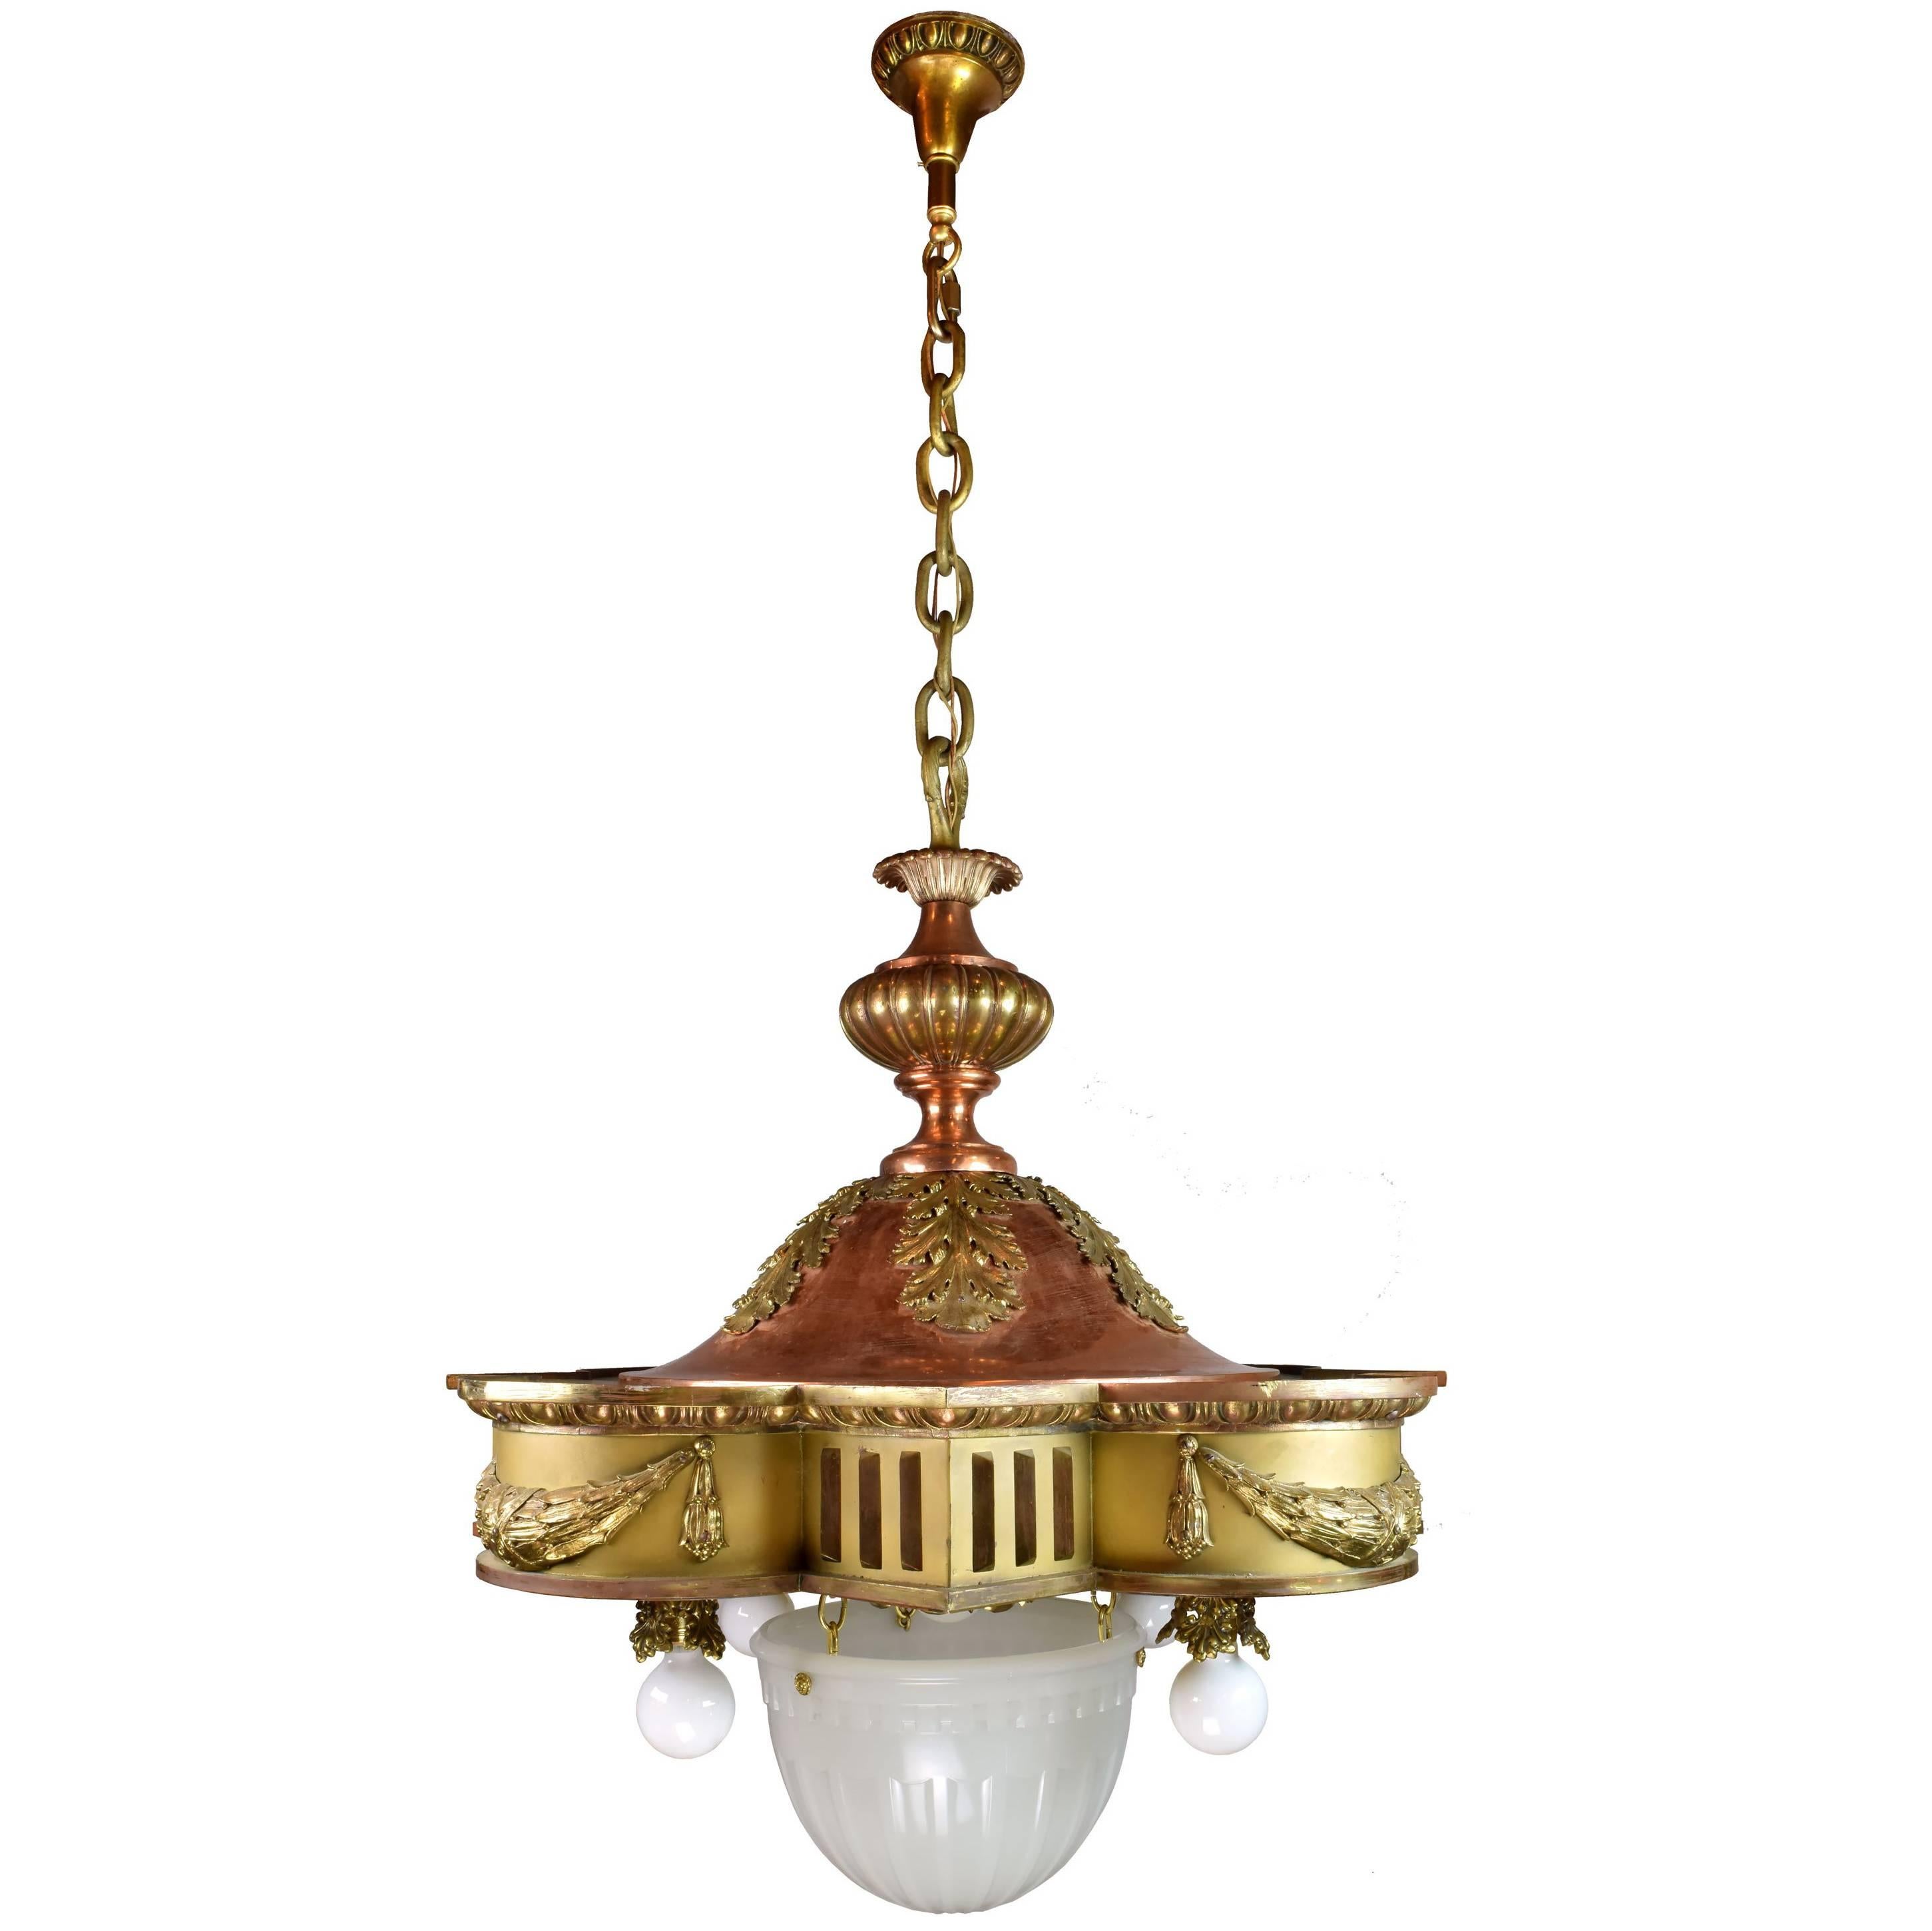 Brass and Copper Theater Light with Glass Bowl